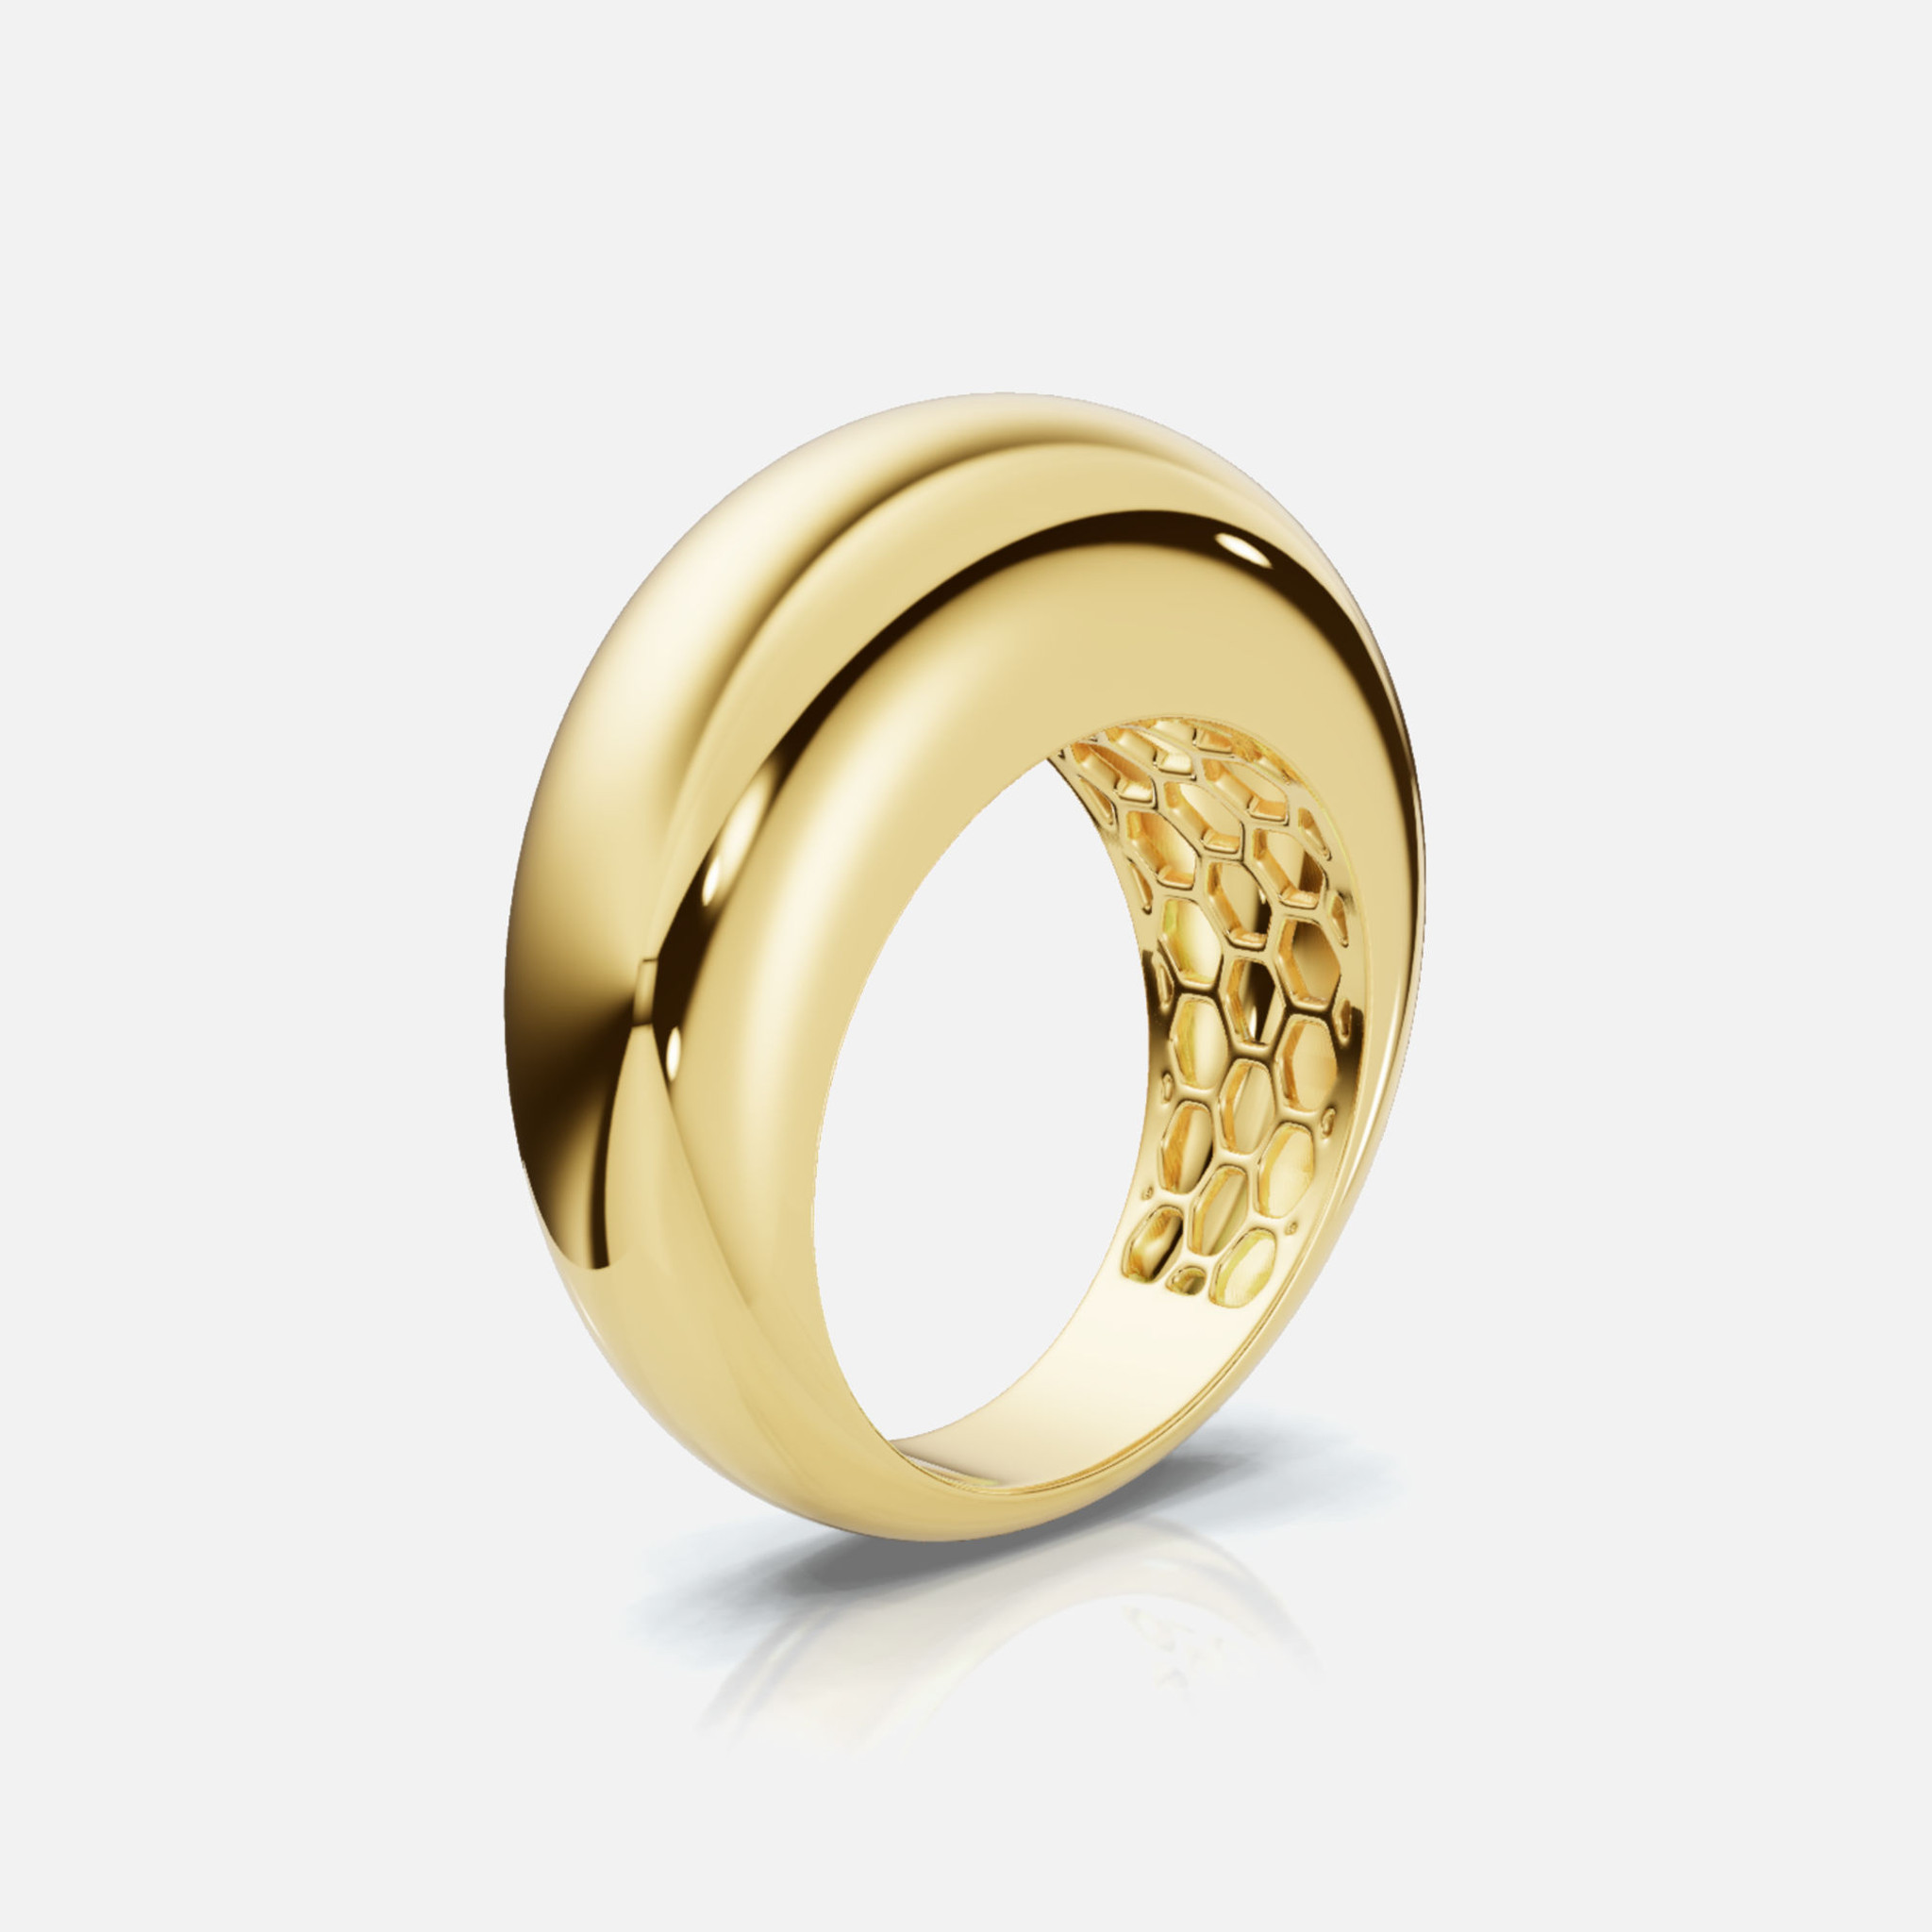 A side view of our yellow gold Dome Ring, boasting a substantial 7mm front for a stylish and sophisticated look, with hexagonal details inside.